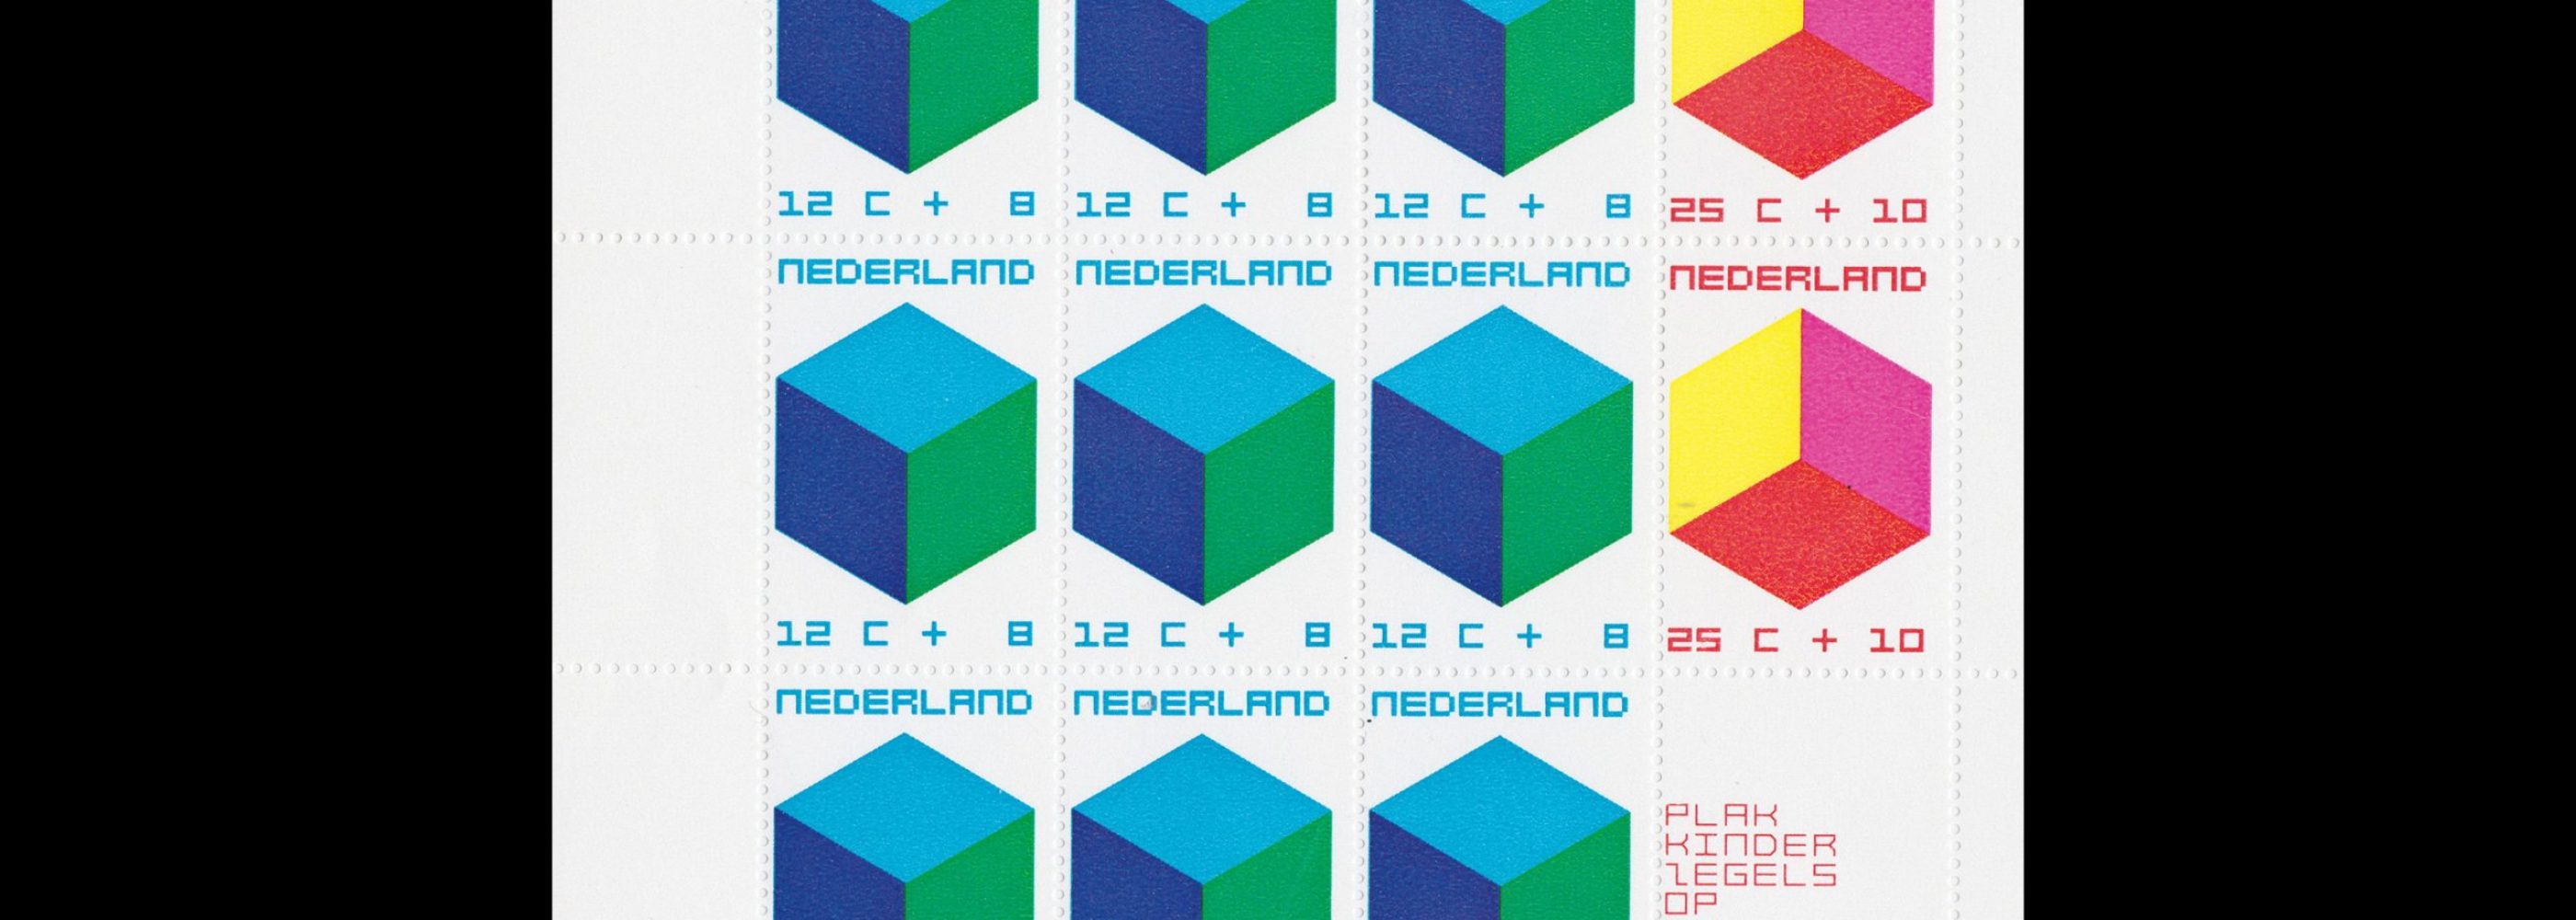 Child Welfare. The Child and the Cube. Netherlands, 1970, Sheet of 12. Designed by William Pars Graatsma